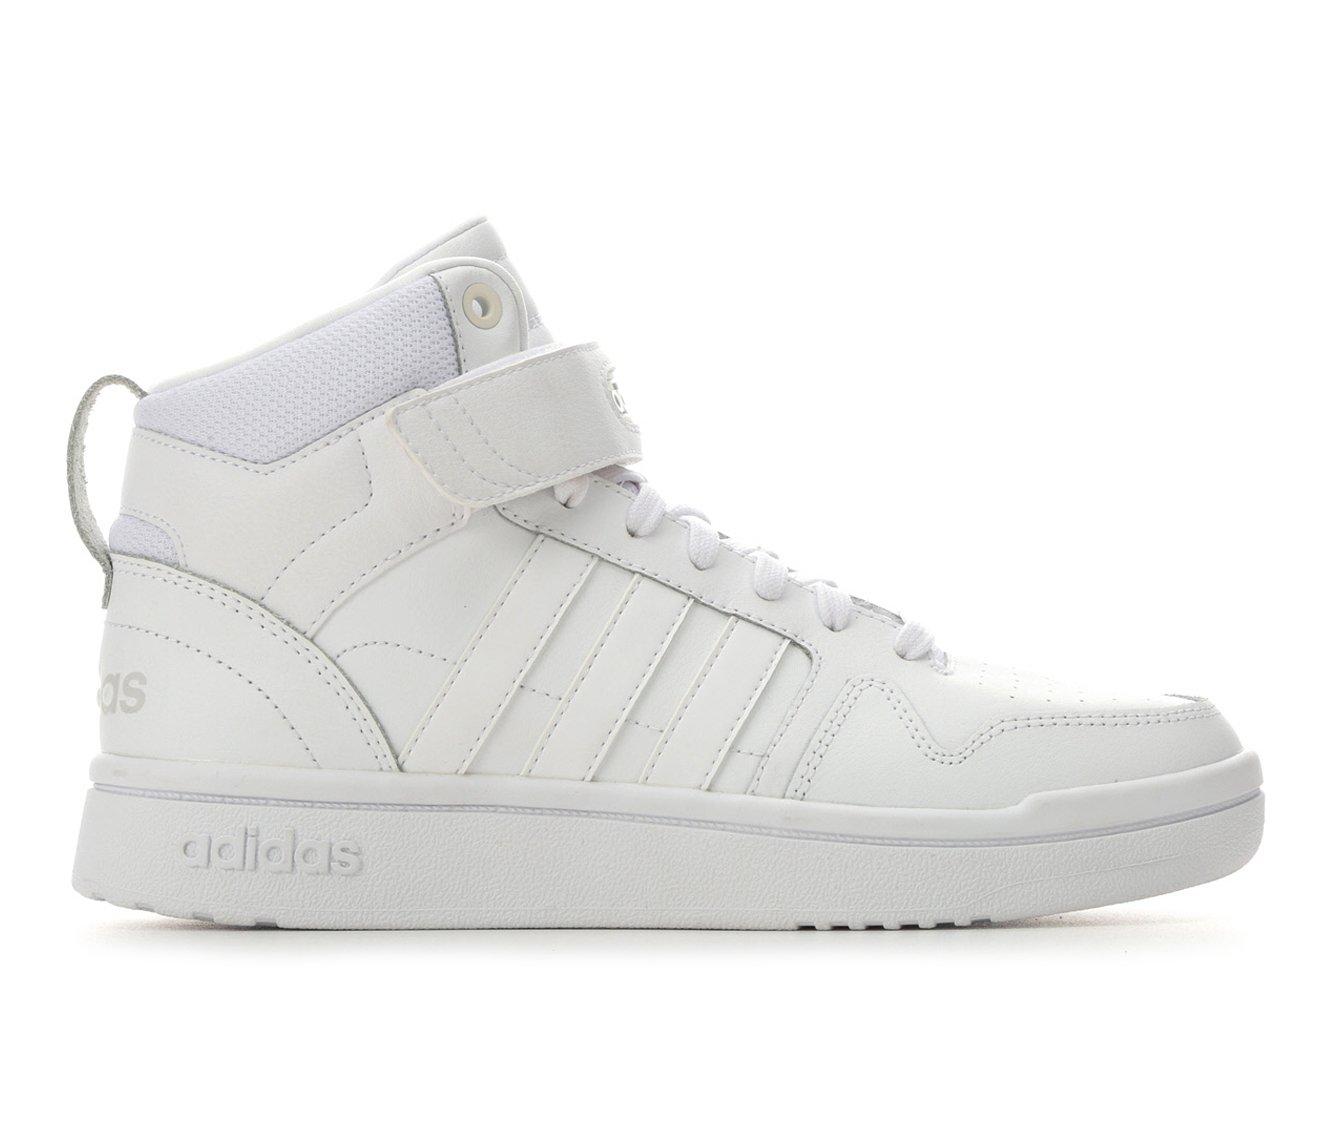 Adidas Post Mid Sustainable Sneakers